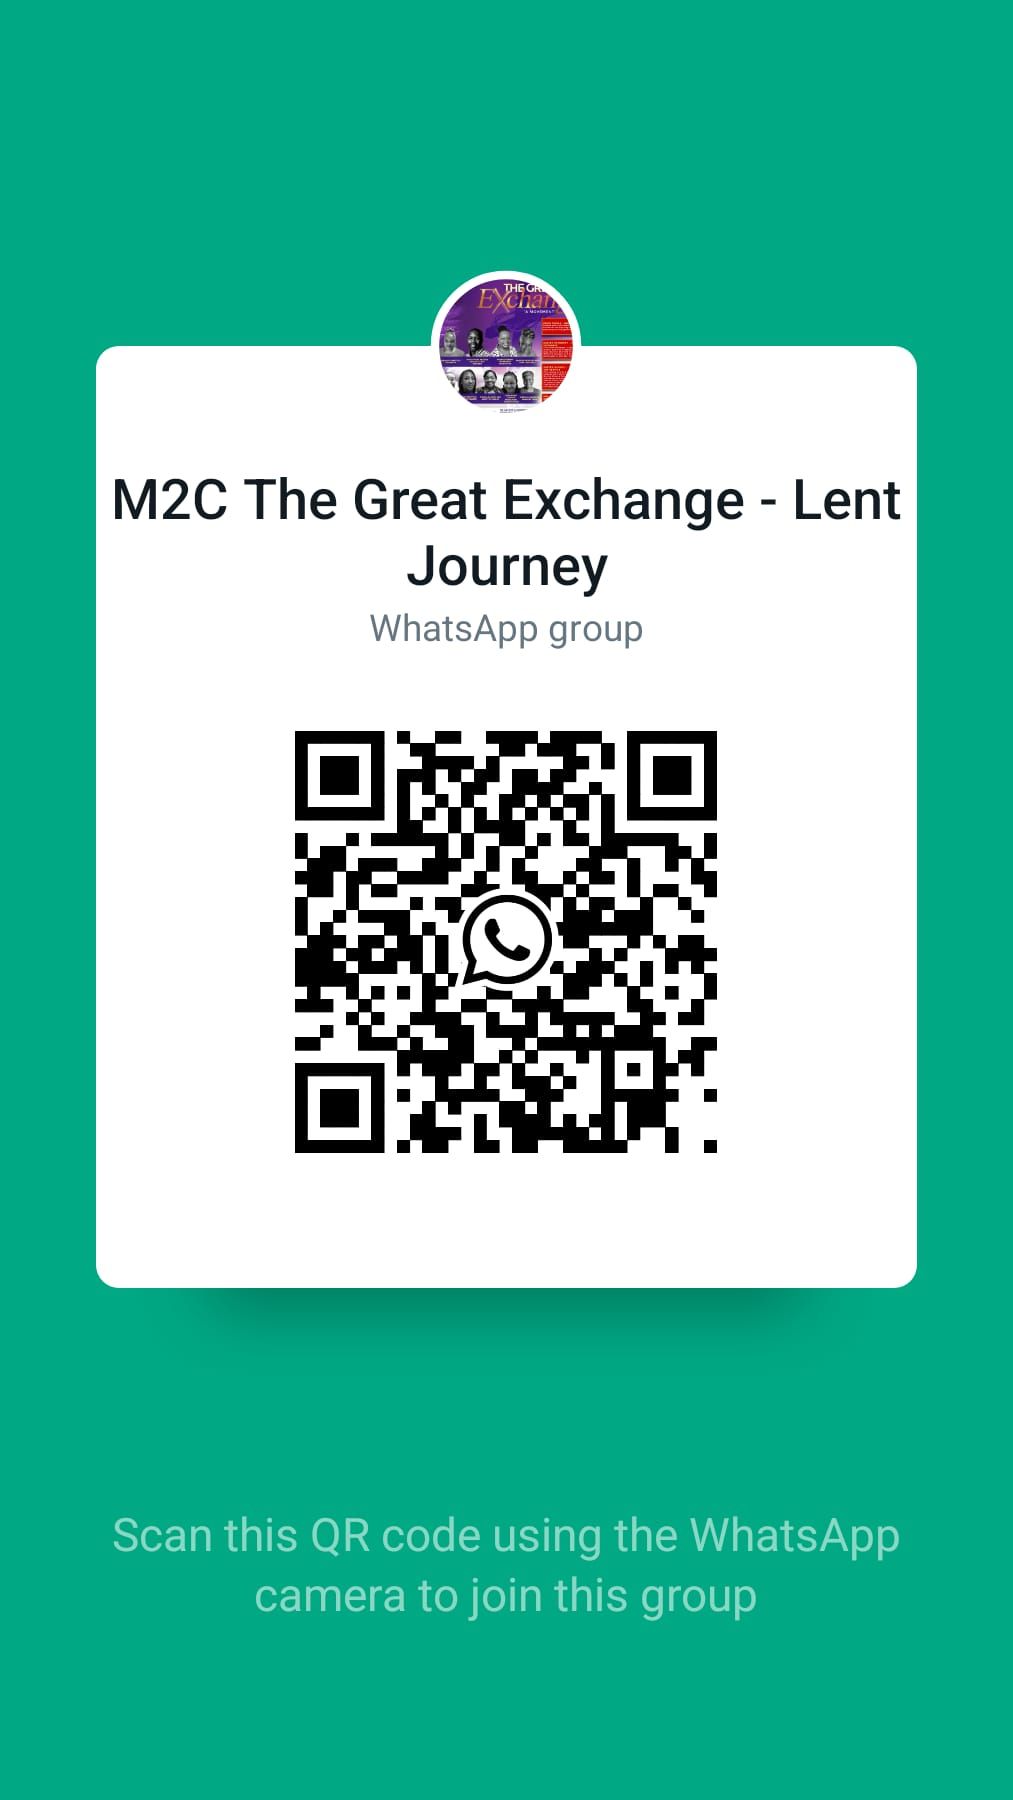 Click or scan to join group